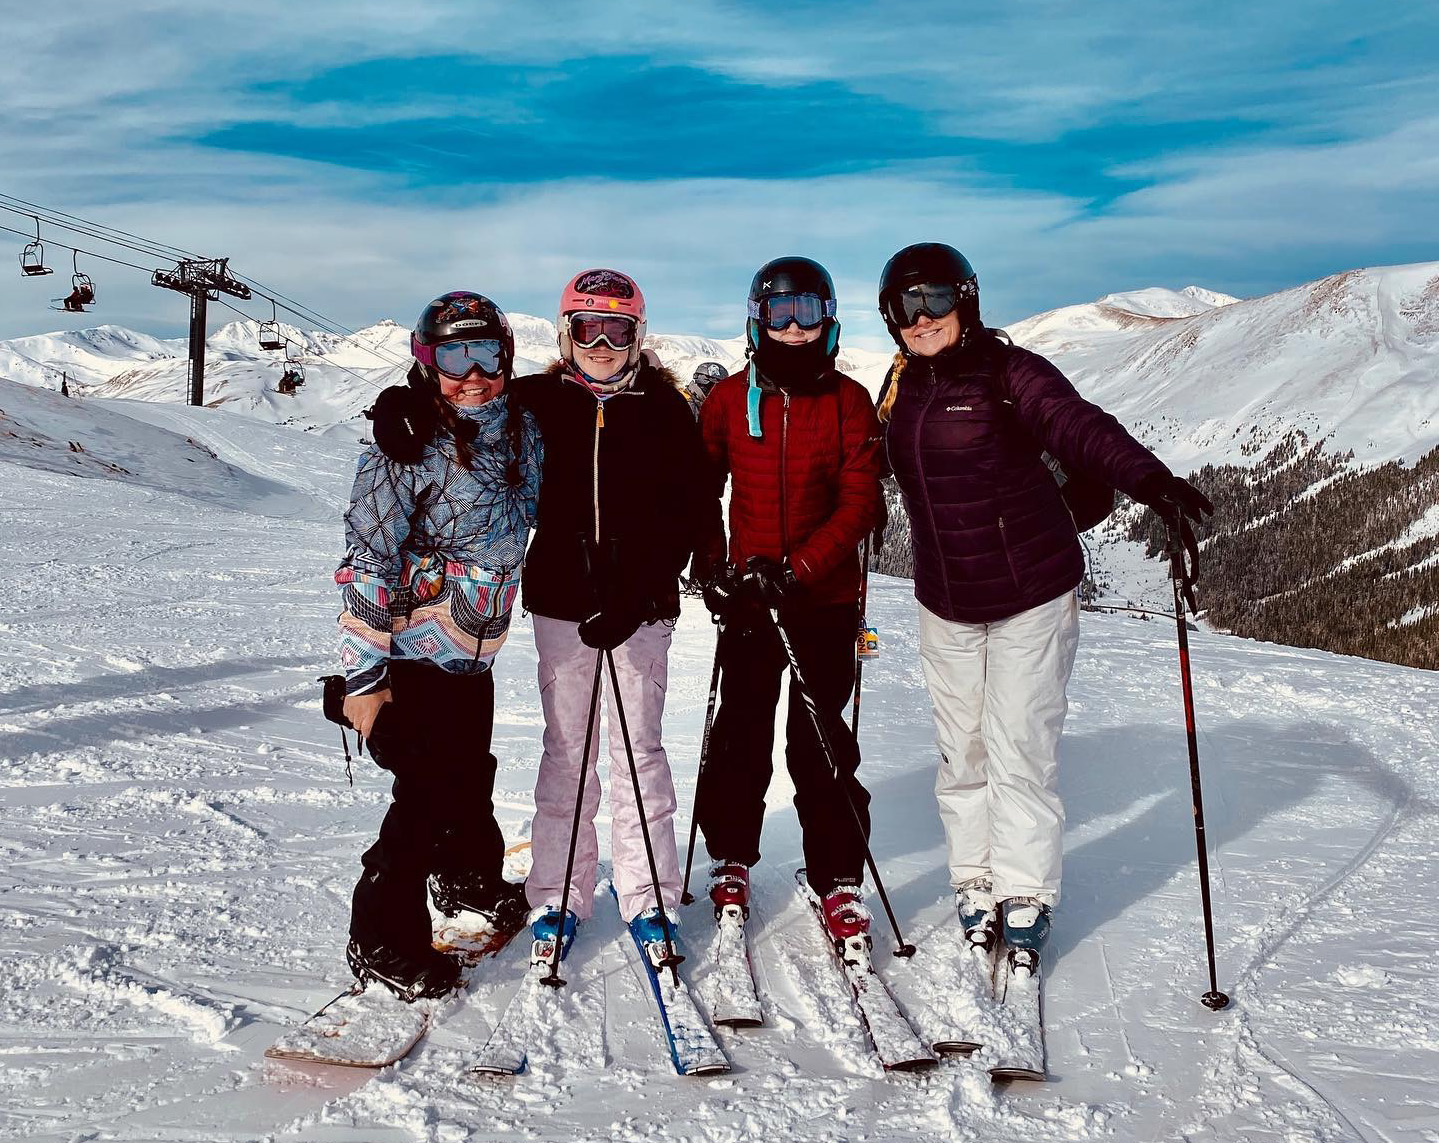 Kim skiing with family